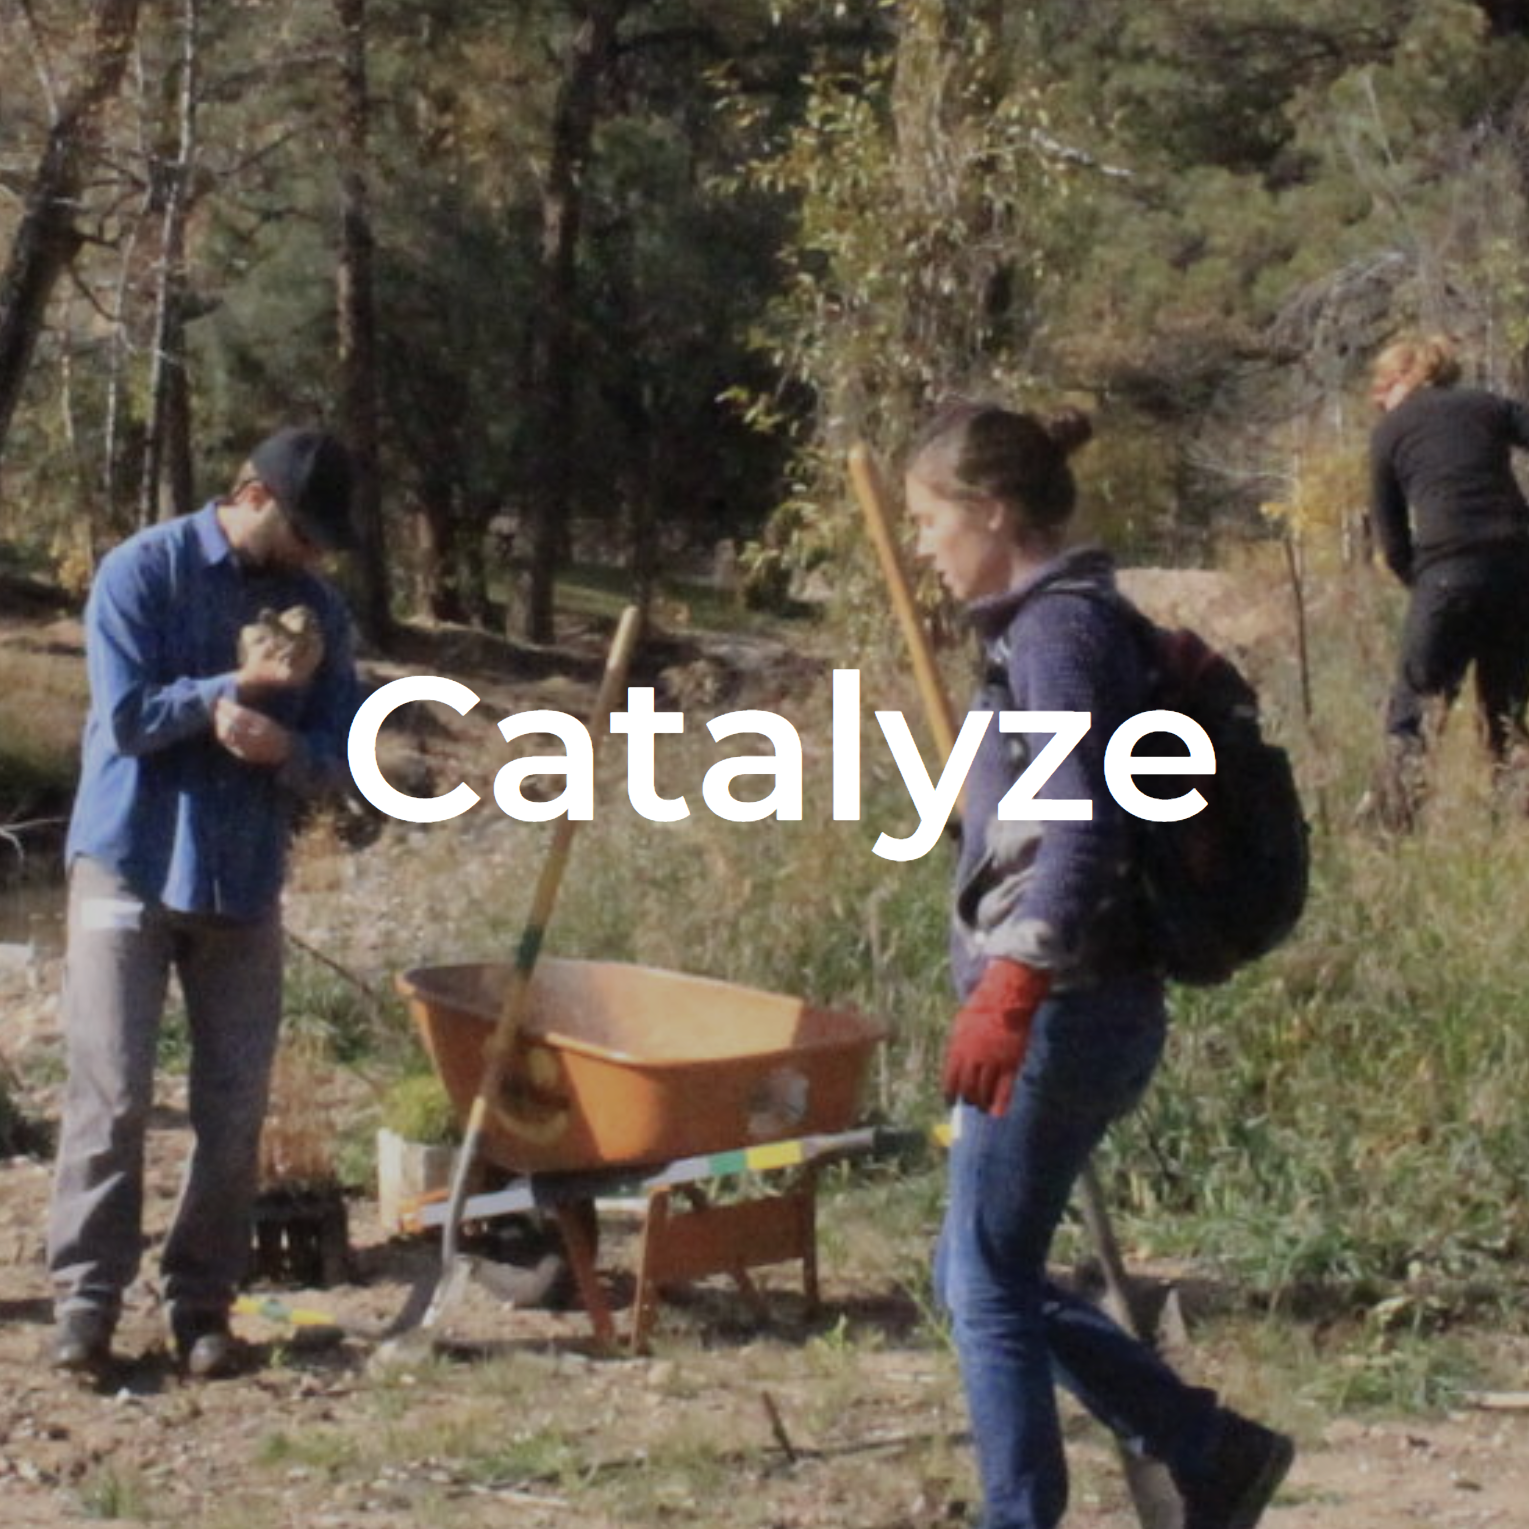 image of the word "catalyze" over two individuals doing field work